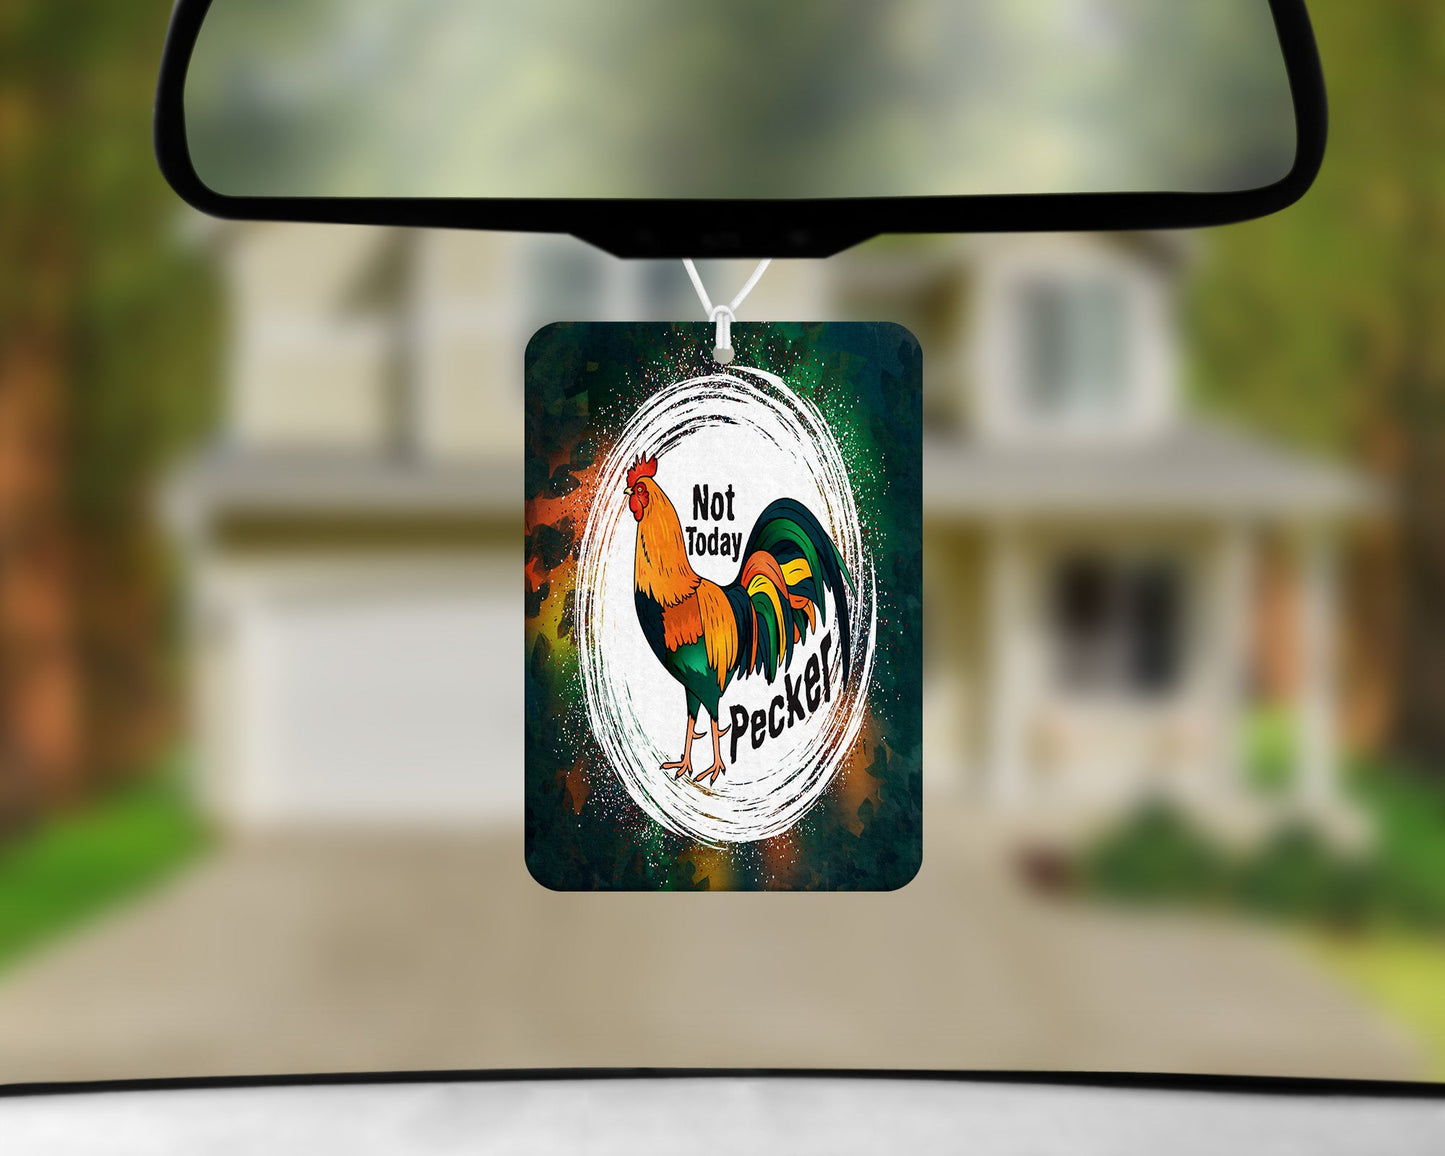 Not Today Pecker |Freshie|Includes Scent Bottle - Vehicle Air Freshener